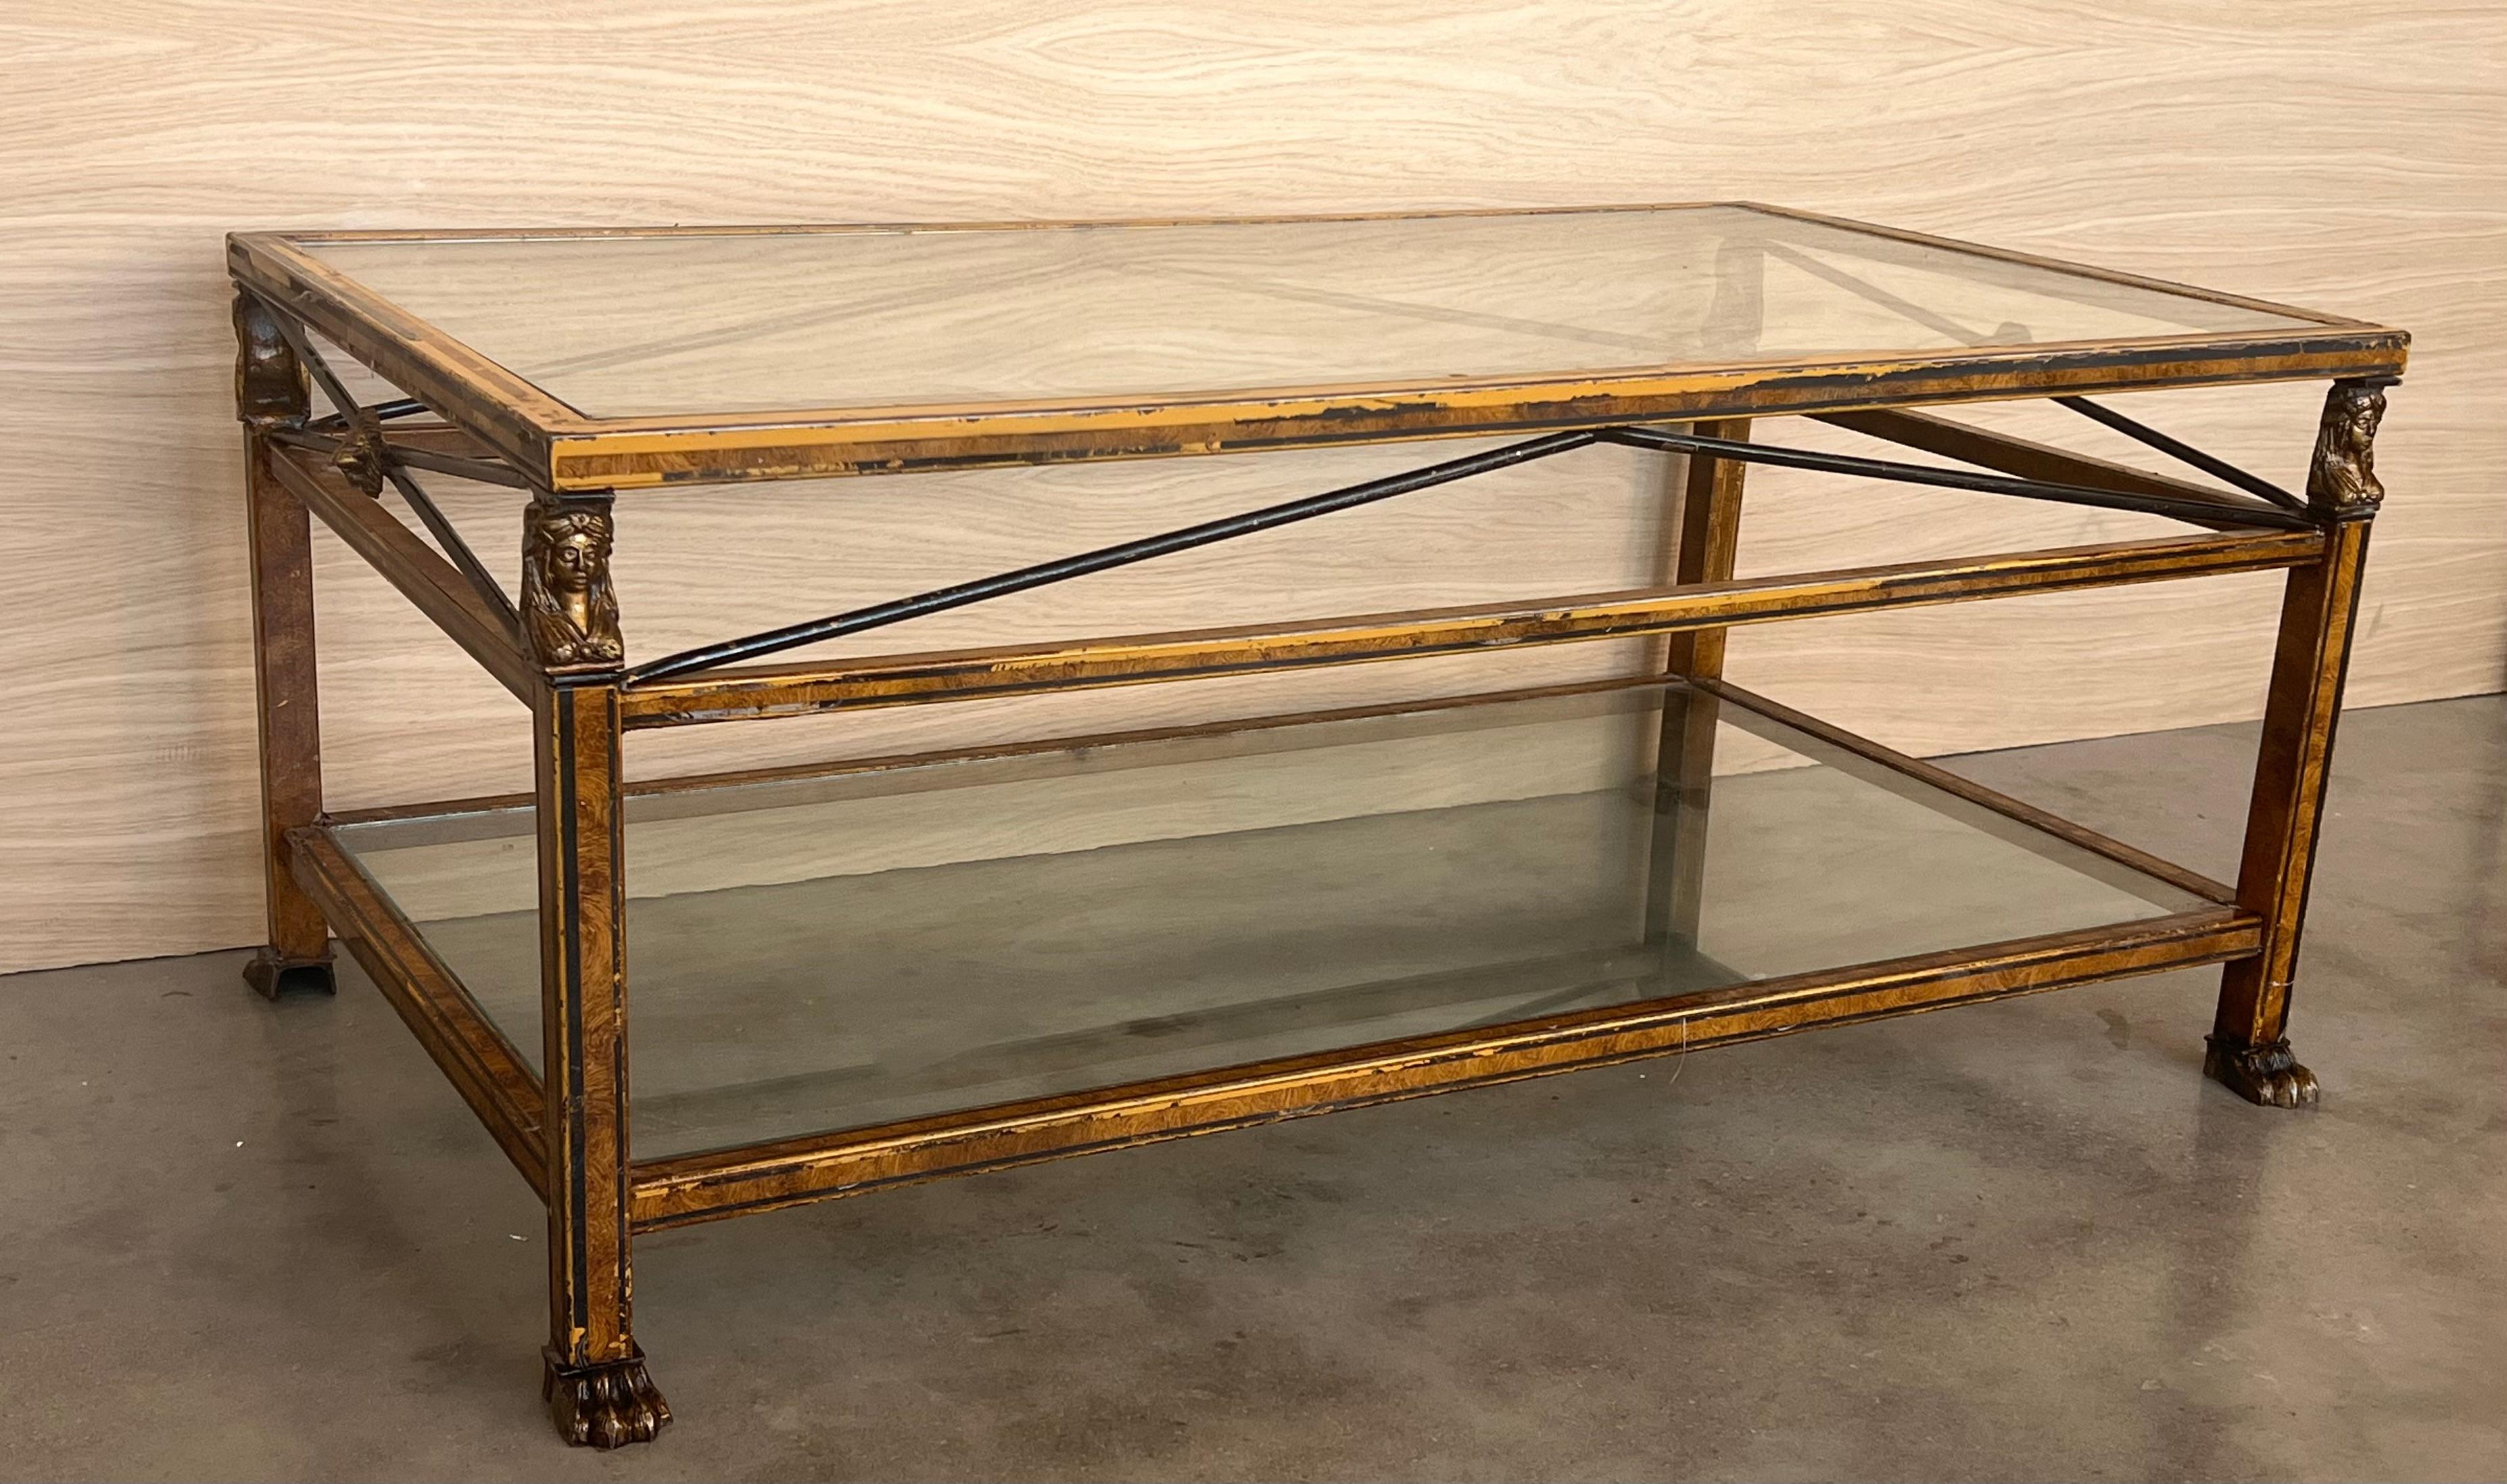 Iron Midcentury Brown Metal Rectangular Coffee Table with Two Tier Glass 1970 For Sale